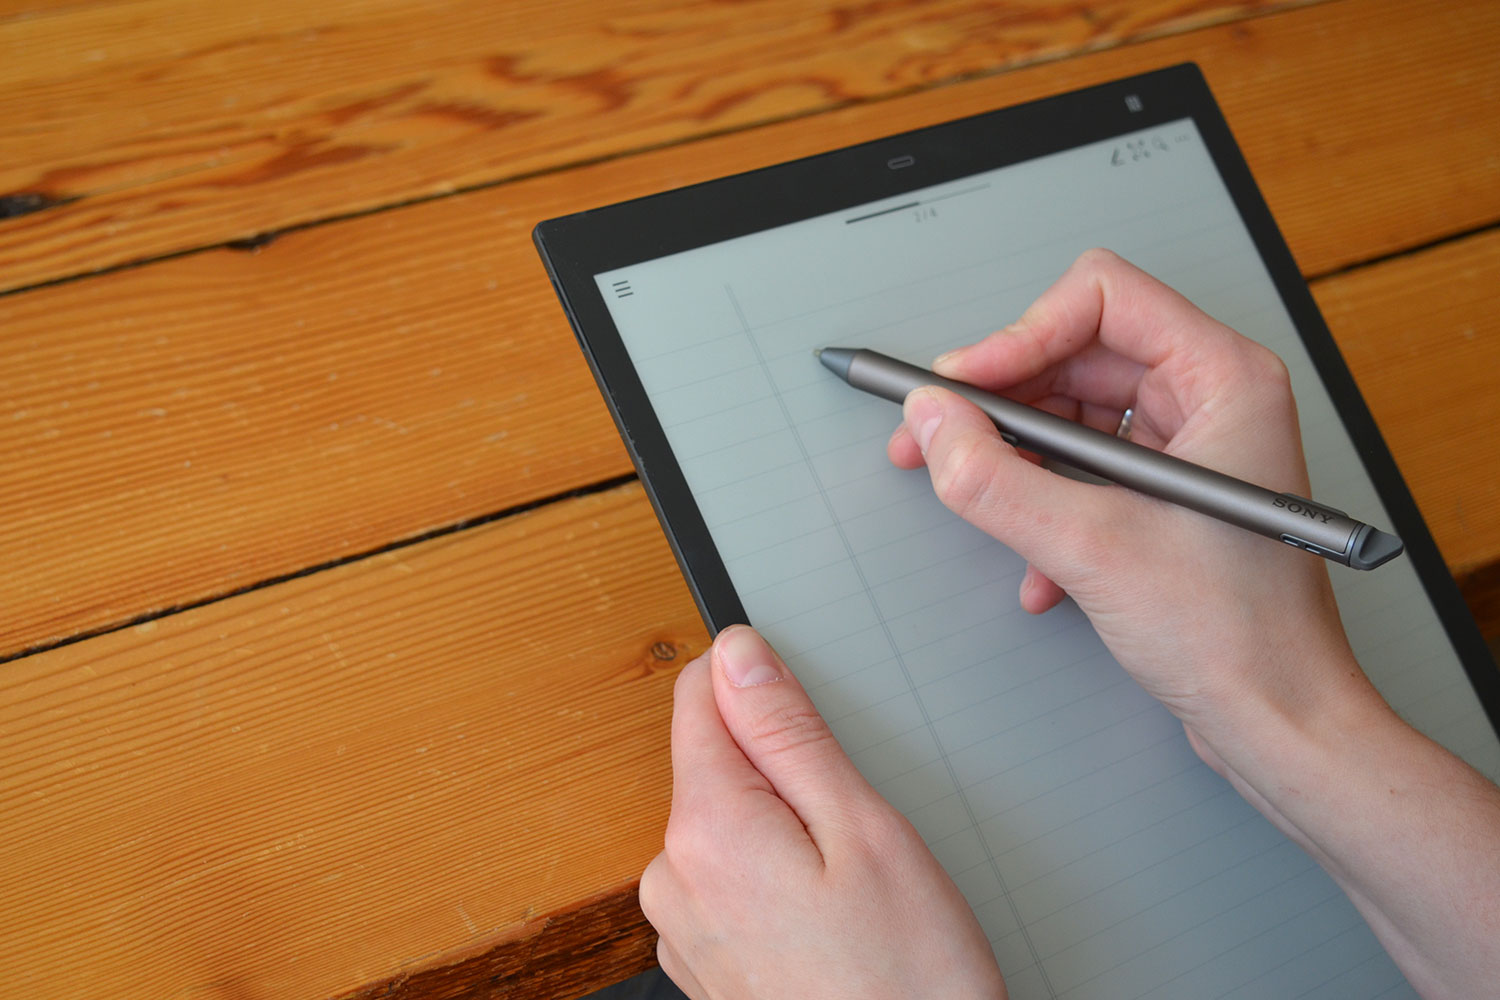 SONY's new A4 tablet recreates the tangibility of writing on paper